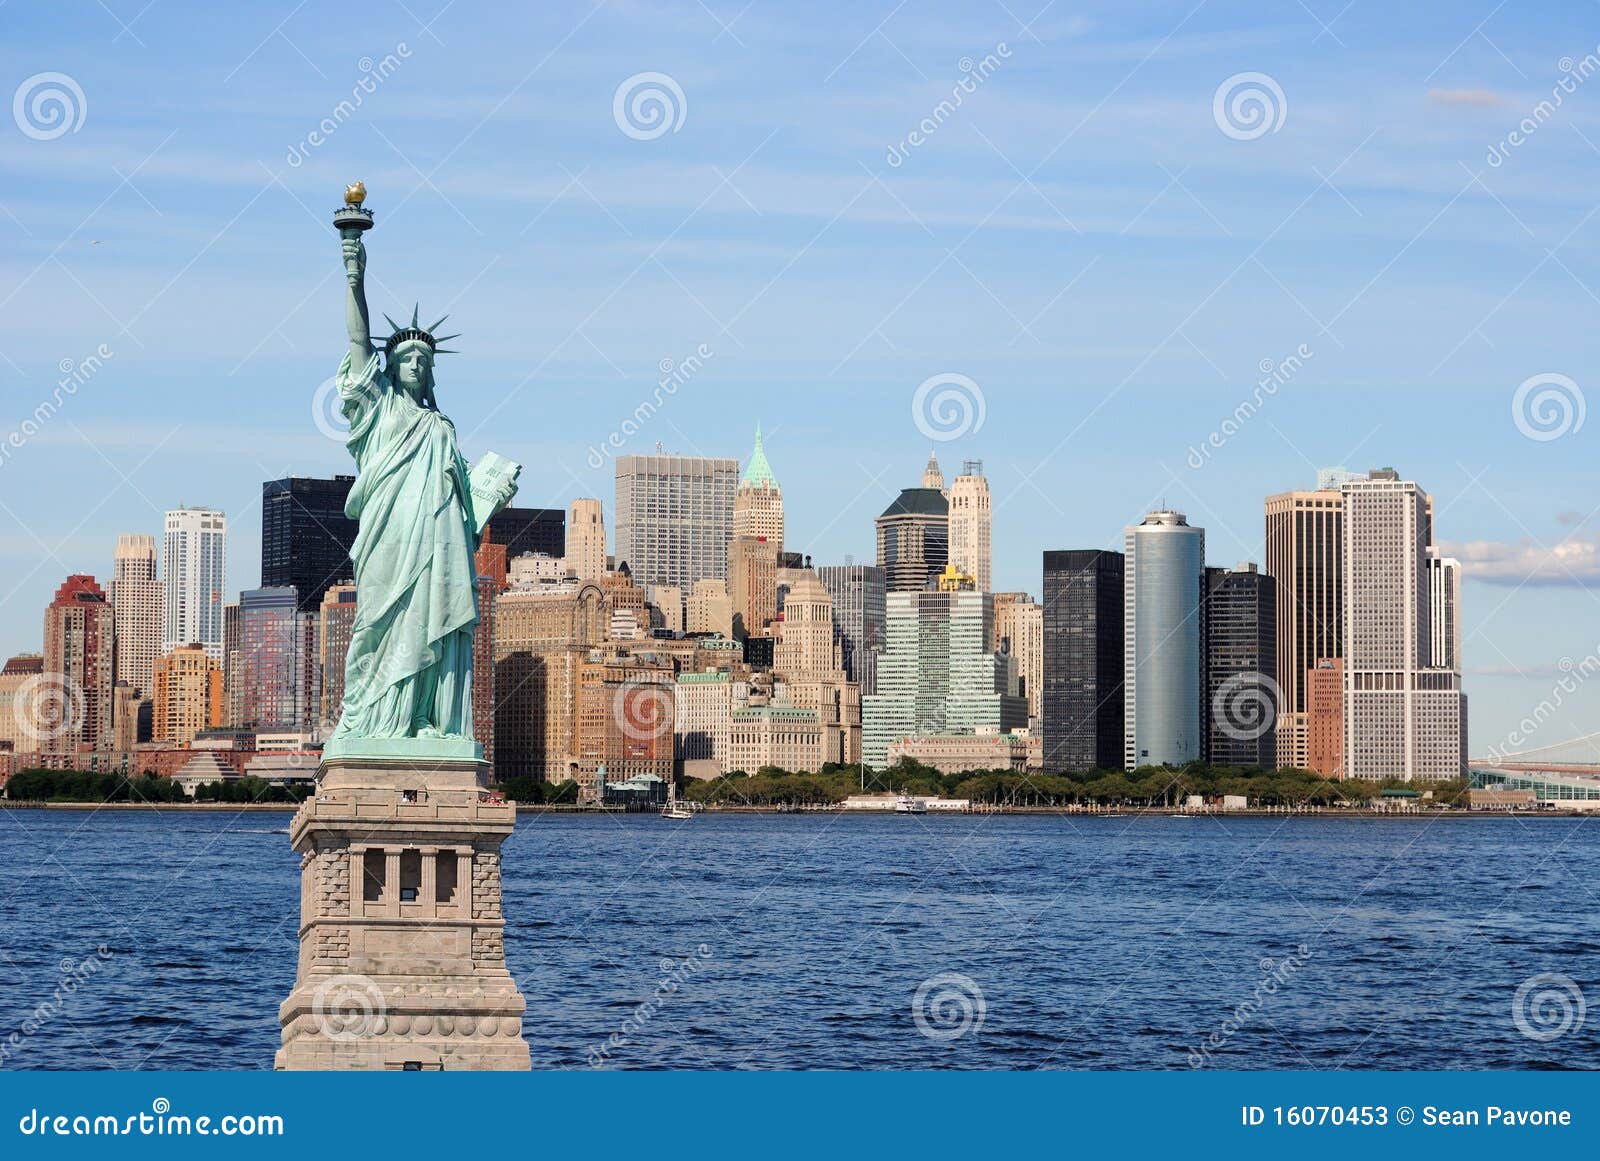 statue of liberty and new york city skyline